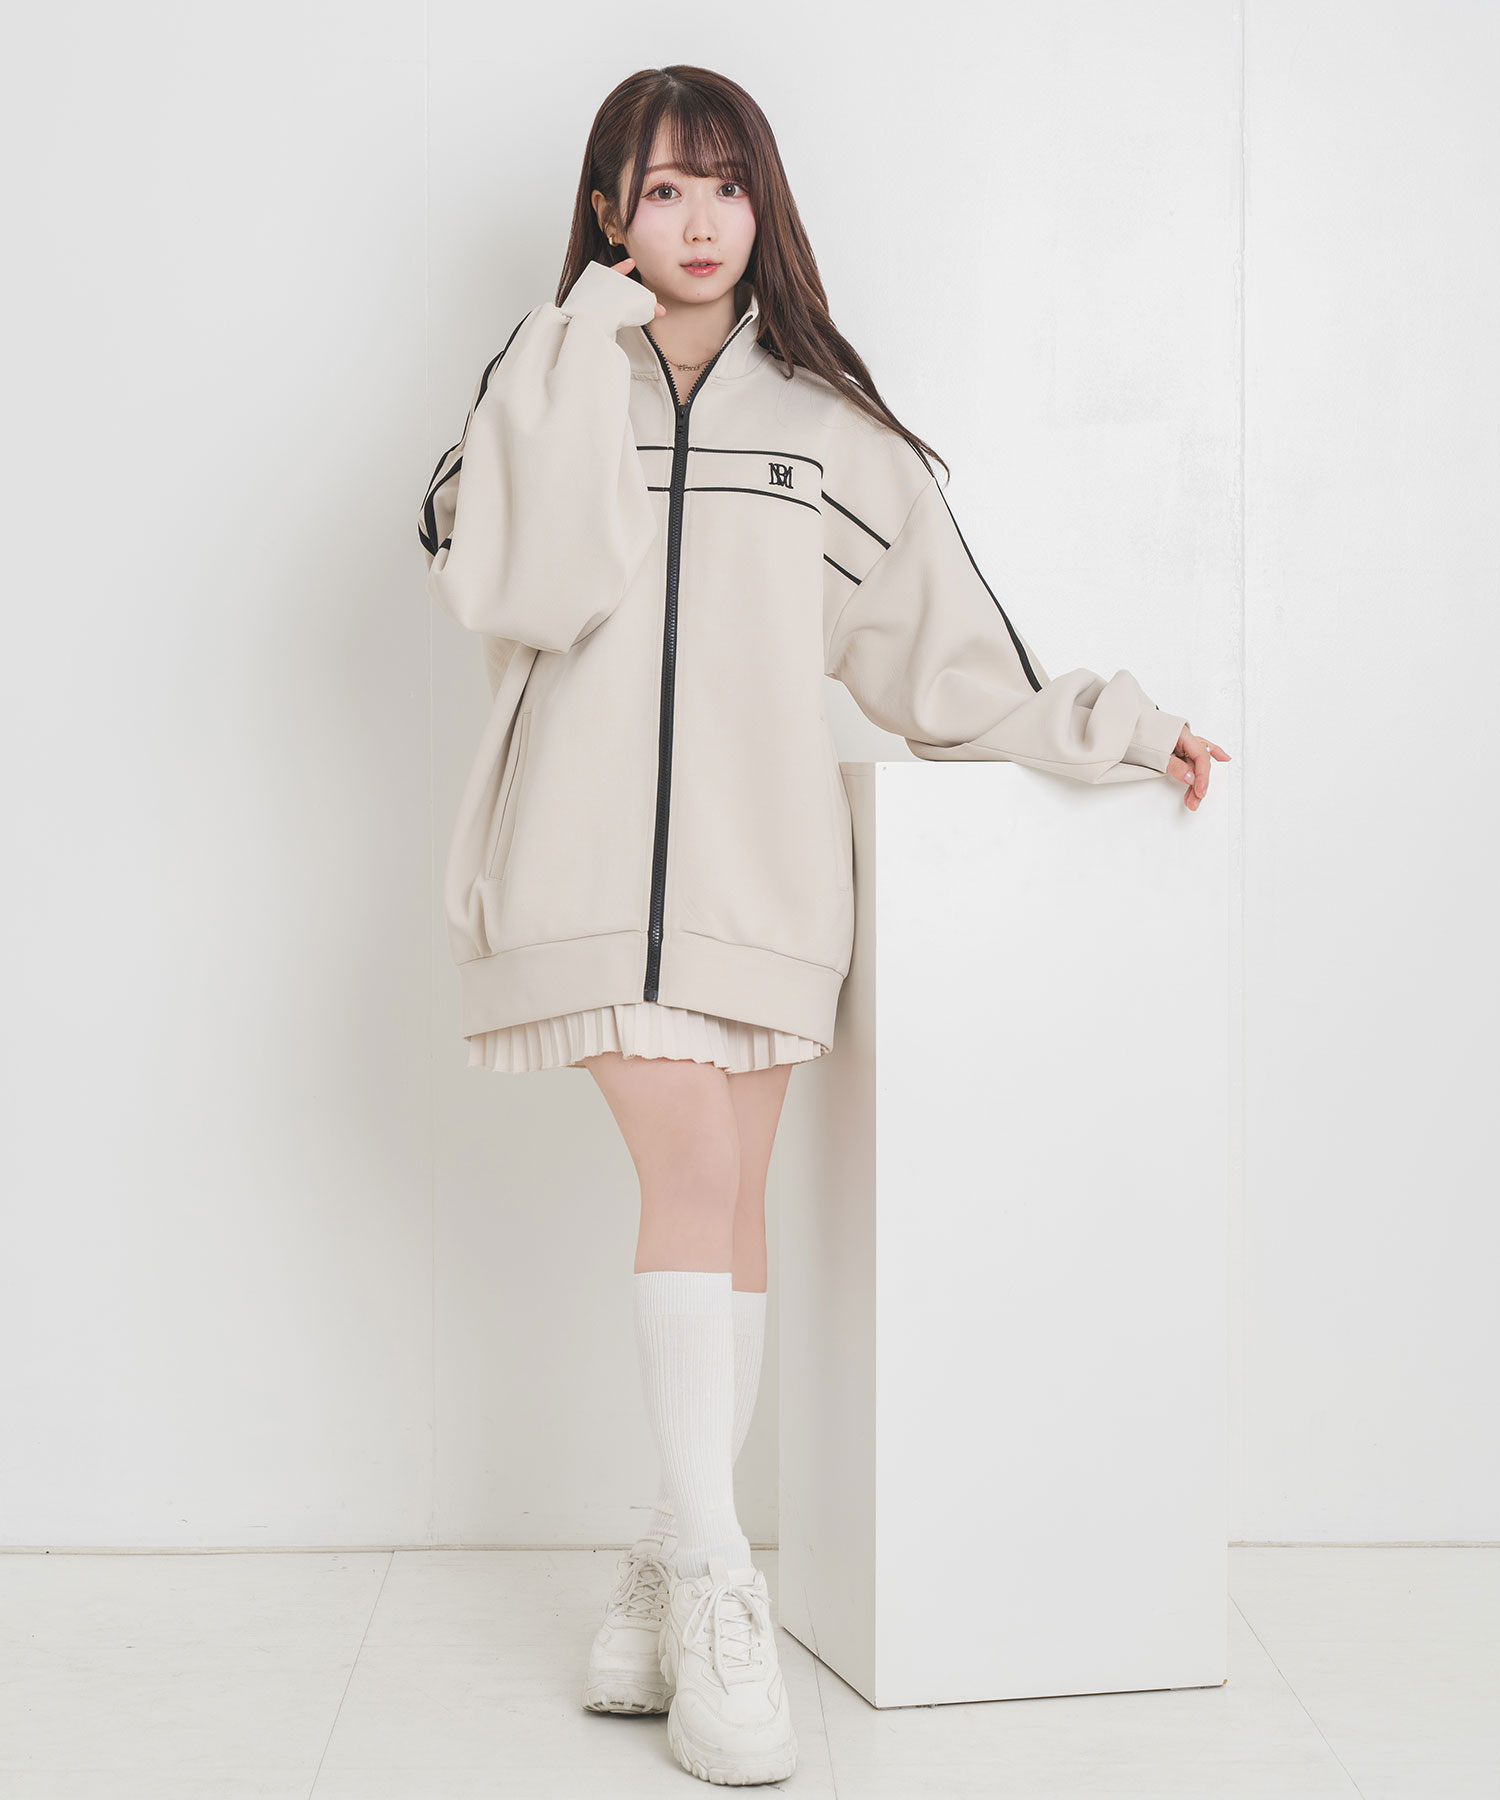 piping jersey outer – BUNNY APARTMENT